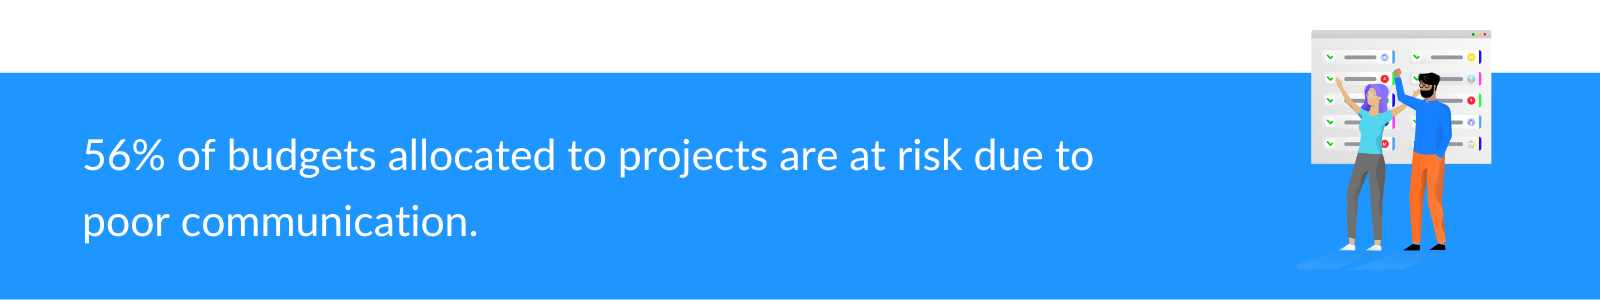 56% of budgets allocated to projects are at risk due to poor communication.